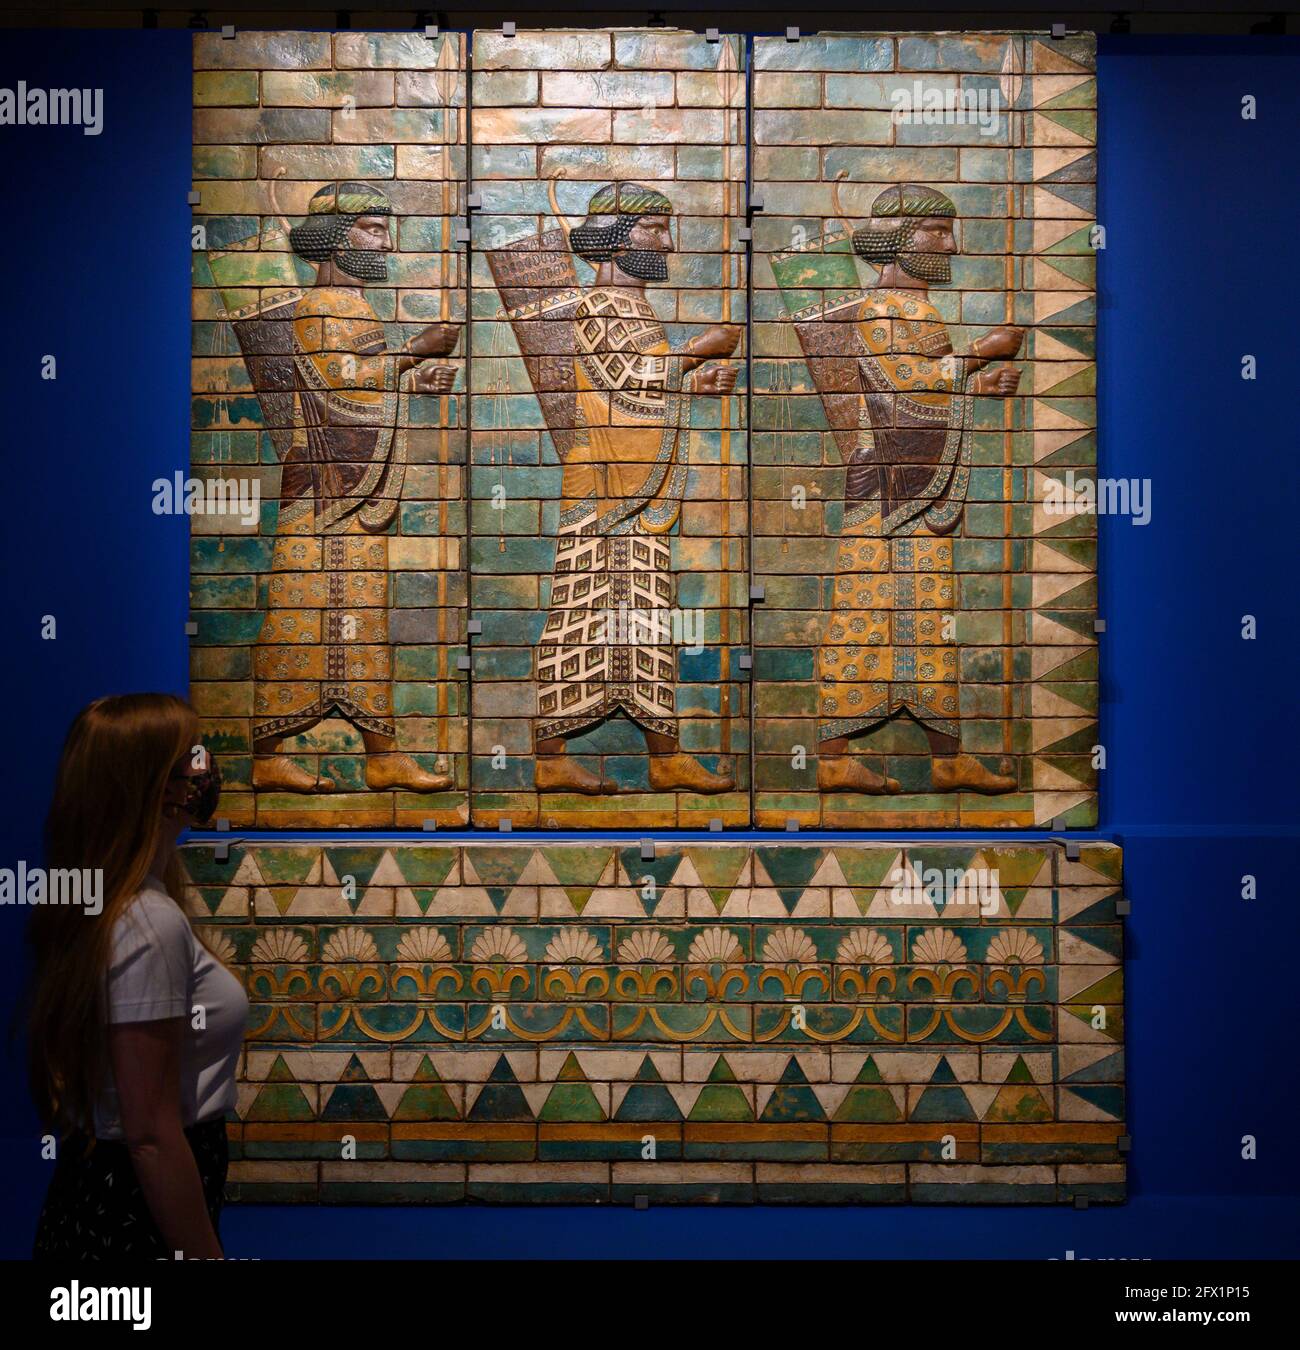 V&A, London UK. 25 May 2021. Epic Iran exhibition explores 5,000 years of art, design and culture through its journey into the 21st century. The exhibition runs from 29 May-12 September 2021. Image: The King’s Bodyguard, 522-486 BC. Copies of glazed panels made in 1889 to 1891. The originals were found in the Palace of Darius at Susa. Processional Guard in Persian costume. V&A Repro. Credit: Malcolm Park/Alamy Live News. Stock Photo